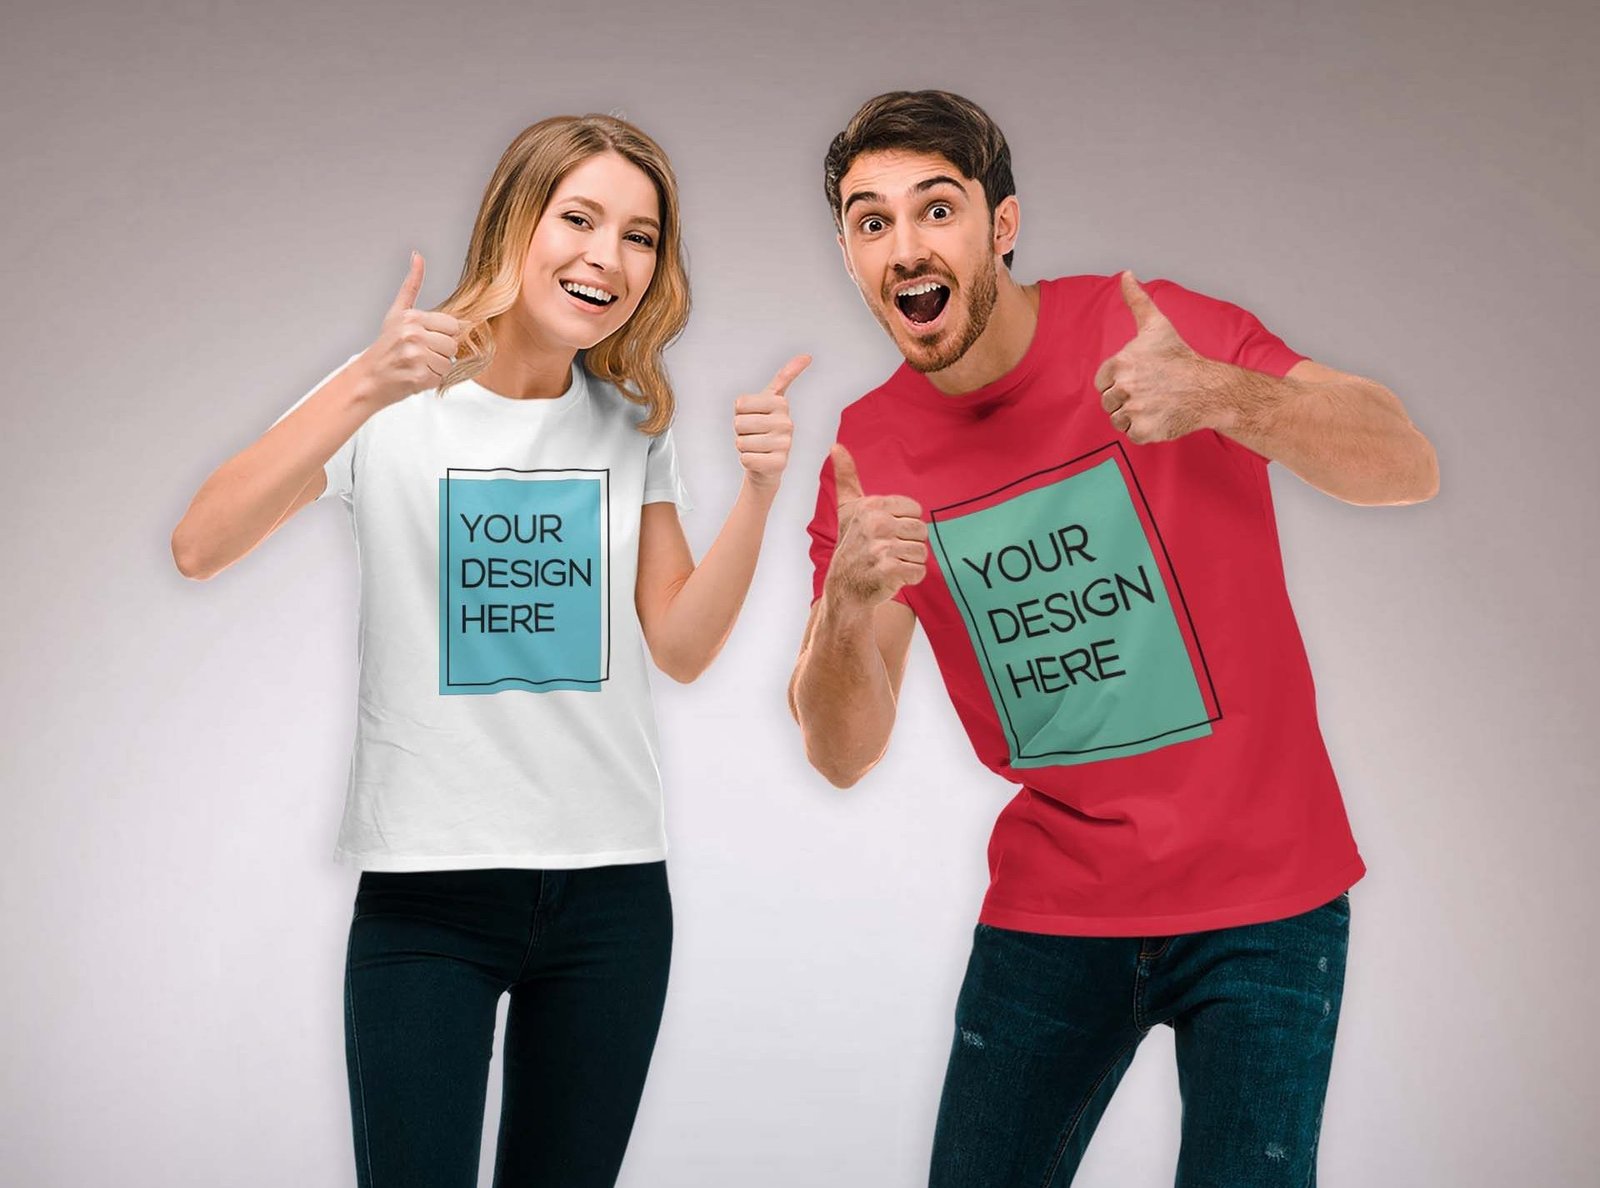 Male and female are happy to wear custom designed t-shirts